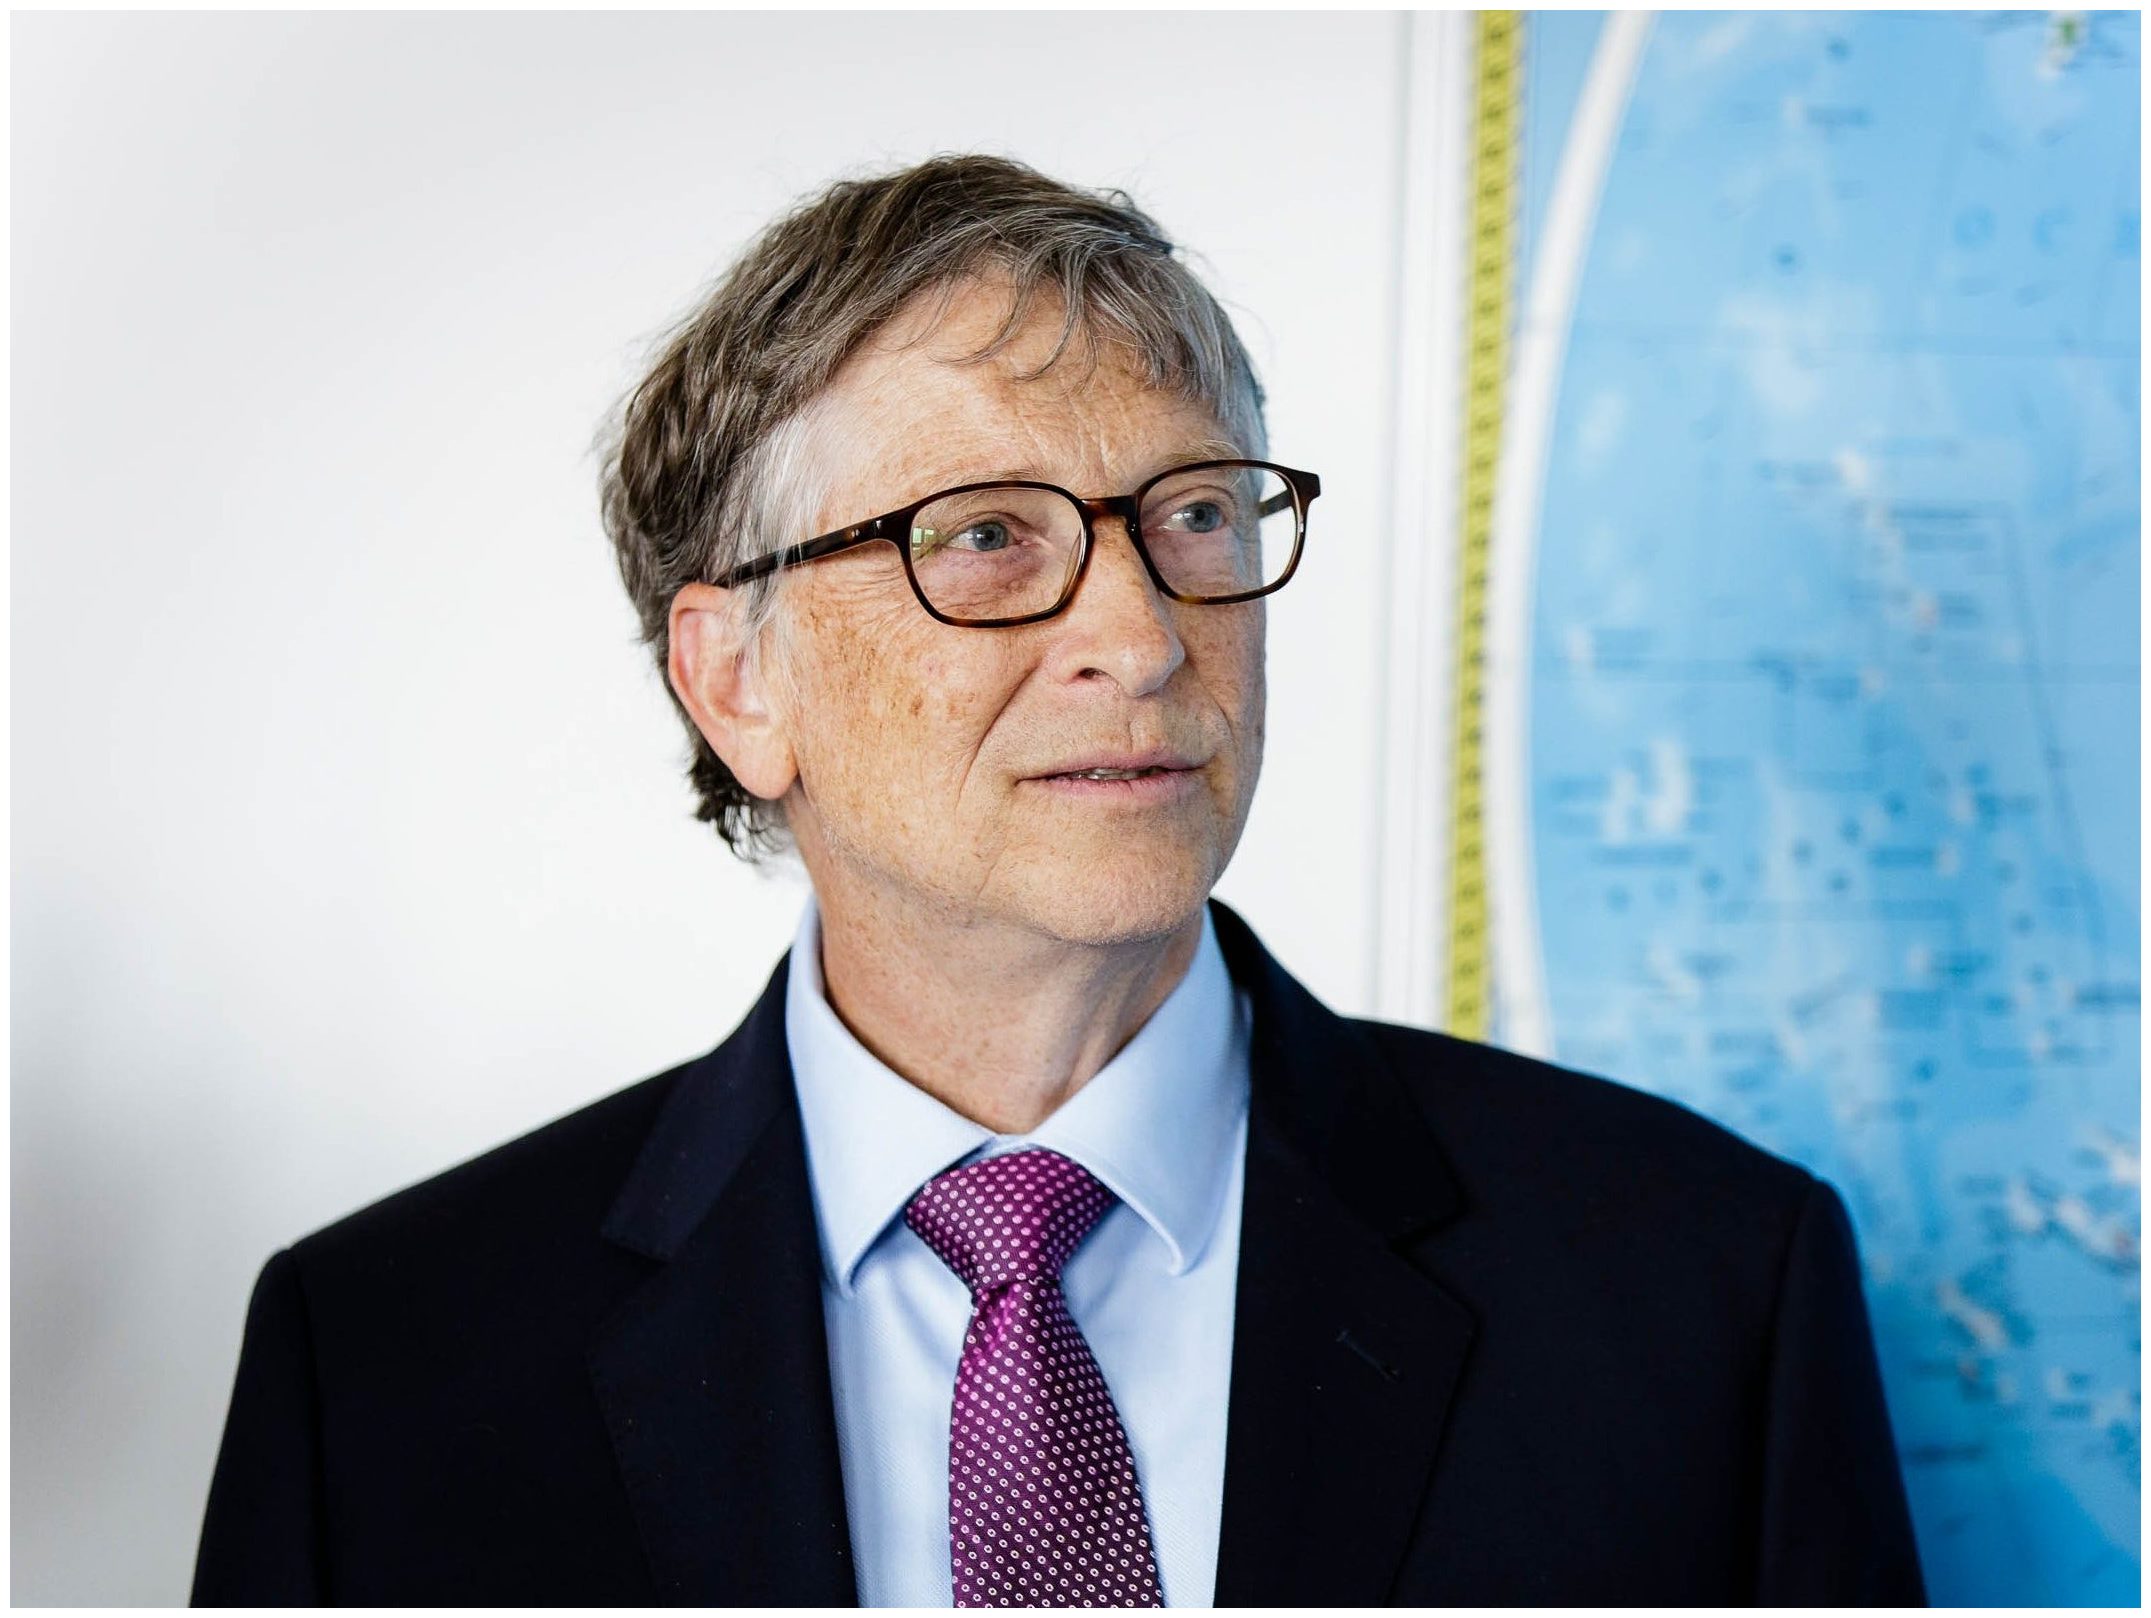 Bill Gates - Bill Gates: Government 'abdicated on many things' Covid ...